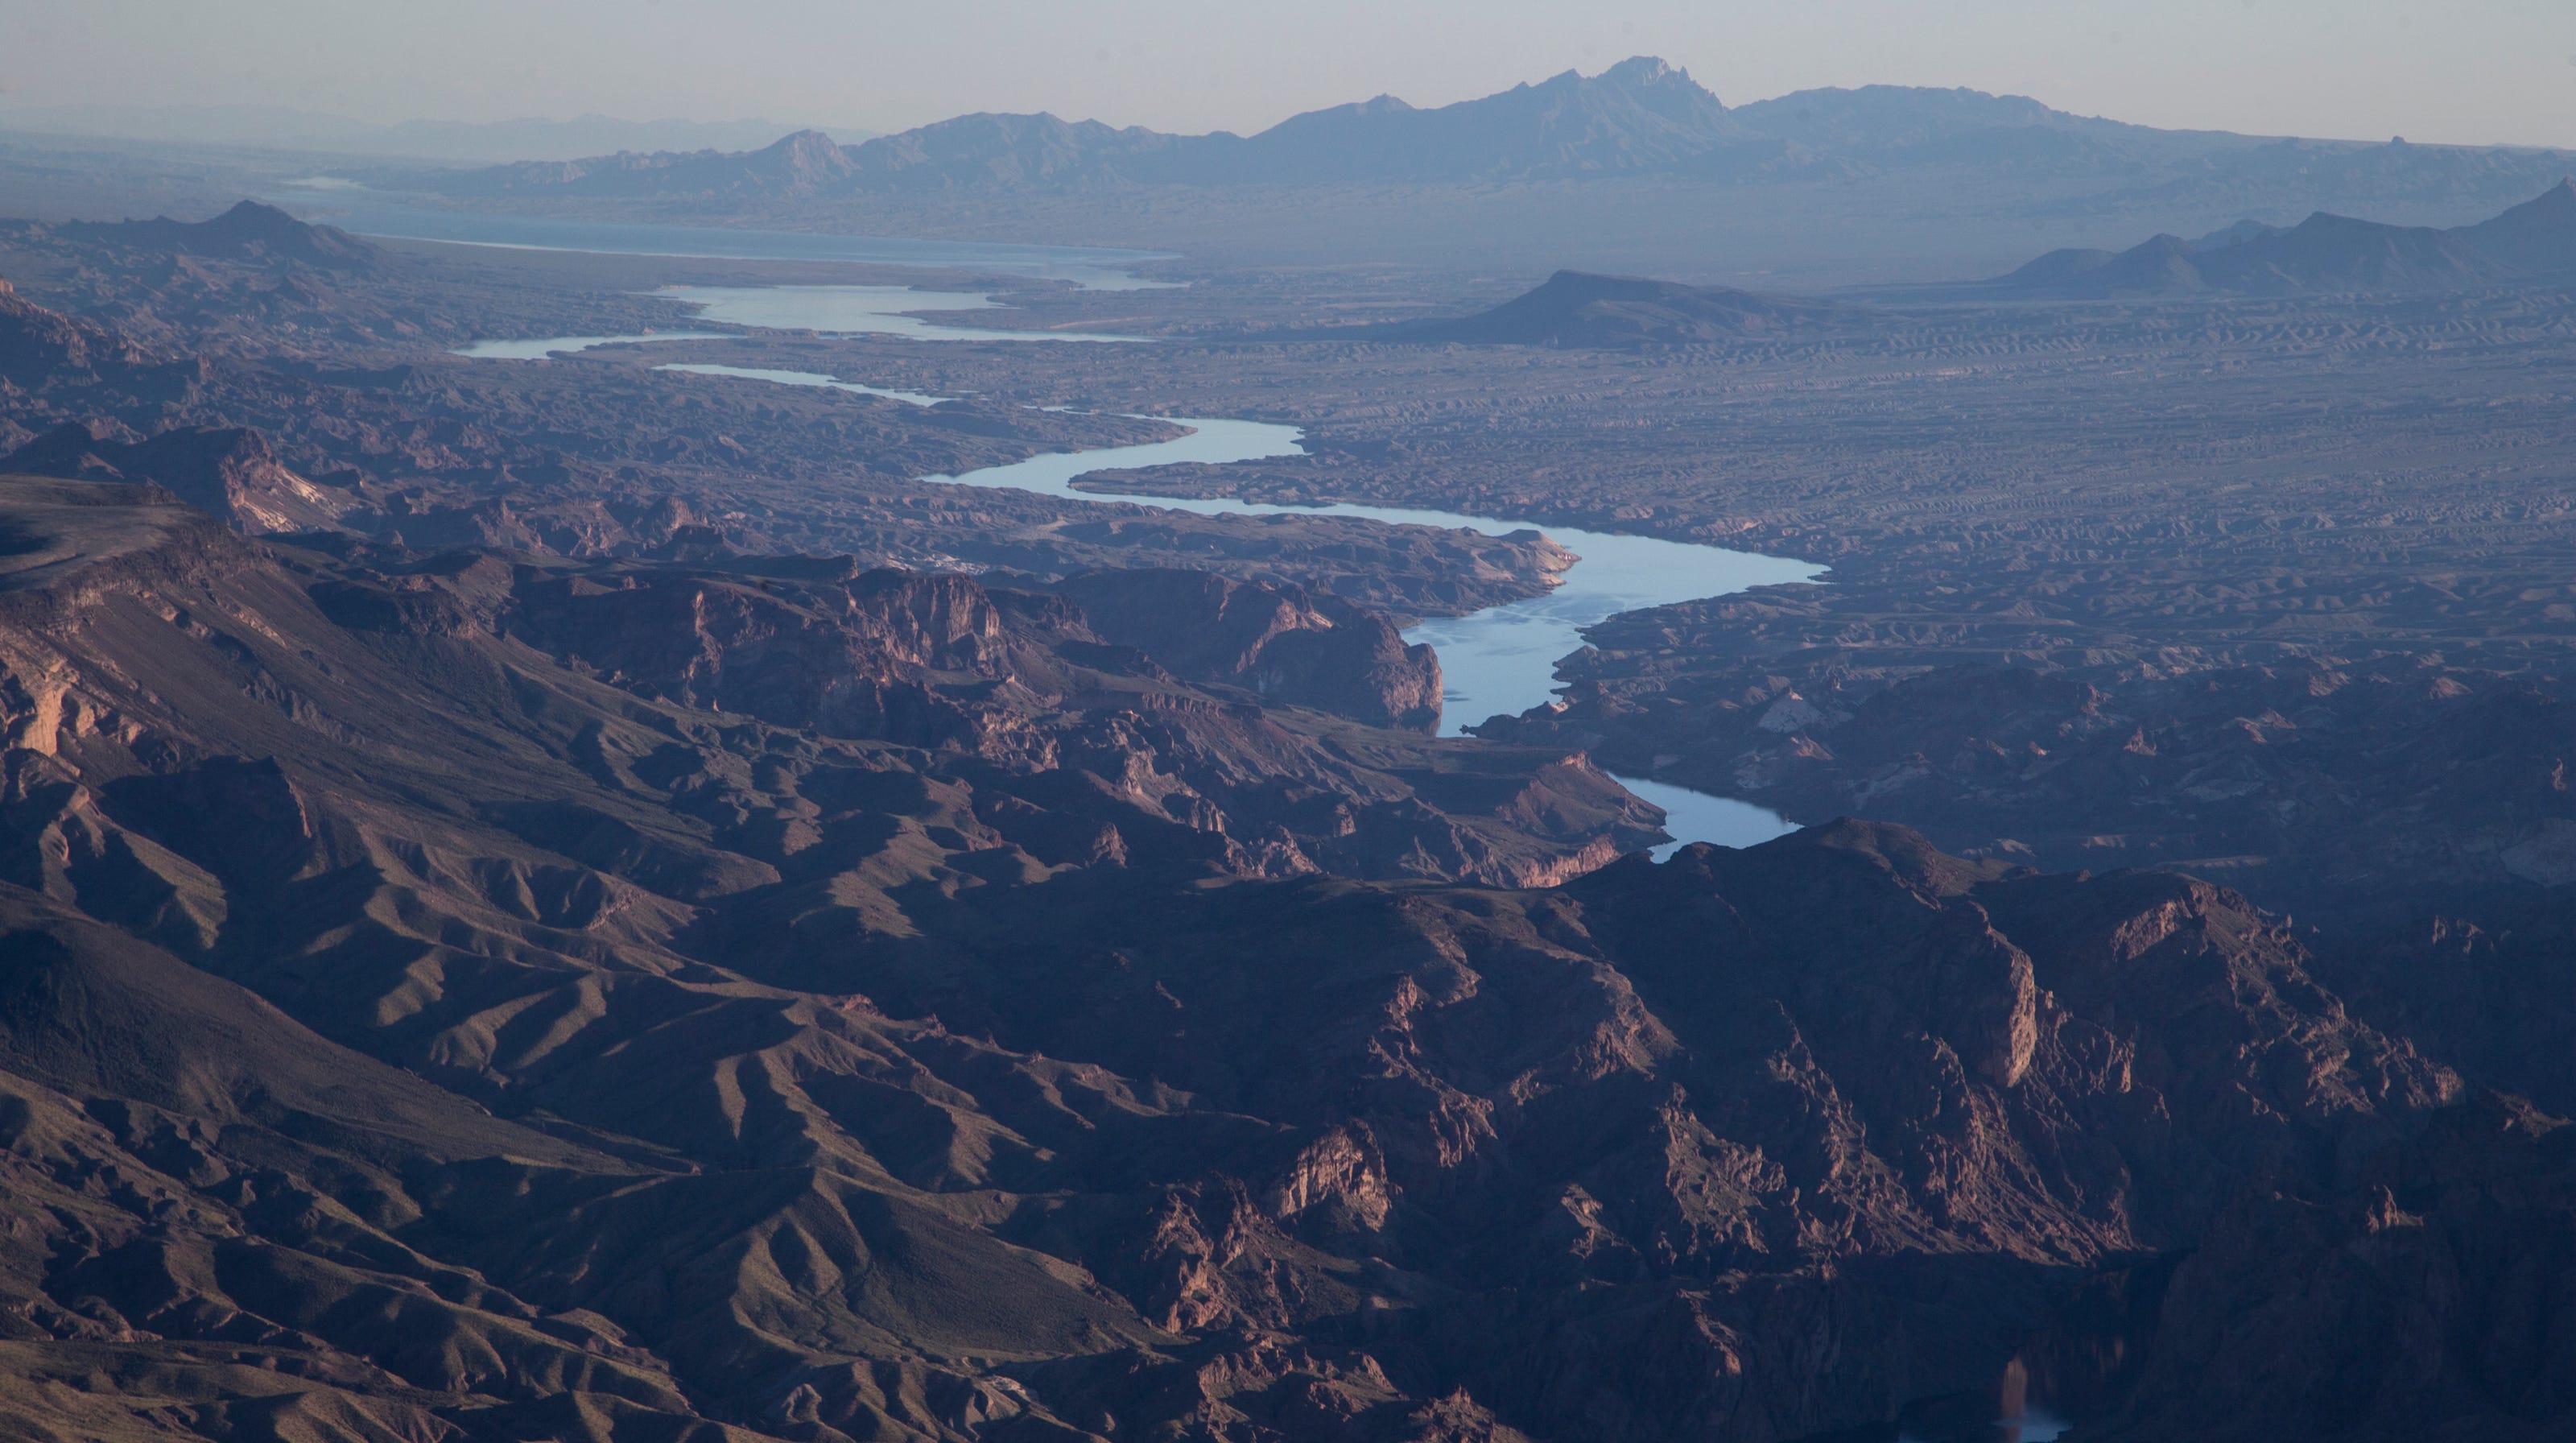 About 40 million people get water from the Colorado River. Studies show it's drying up. - USA TODAY